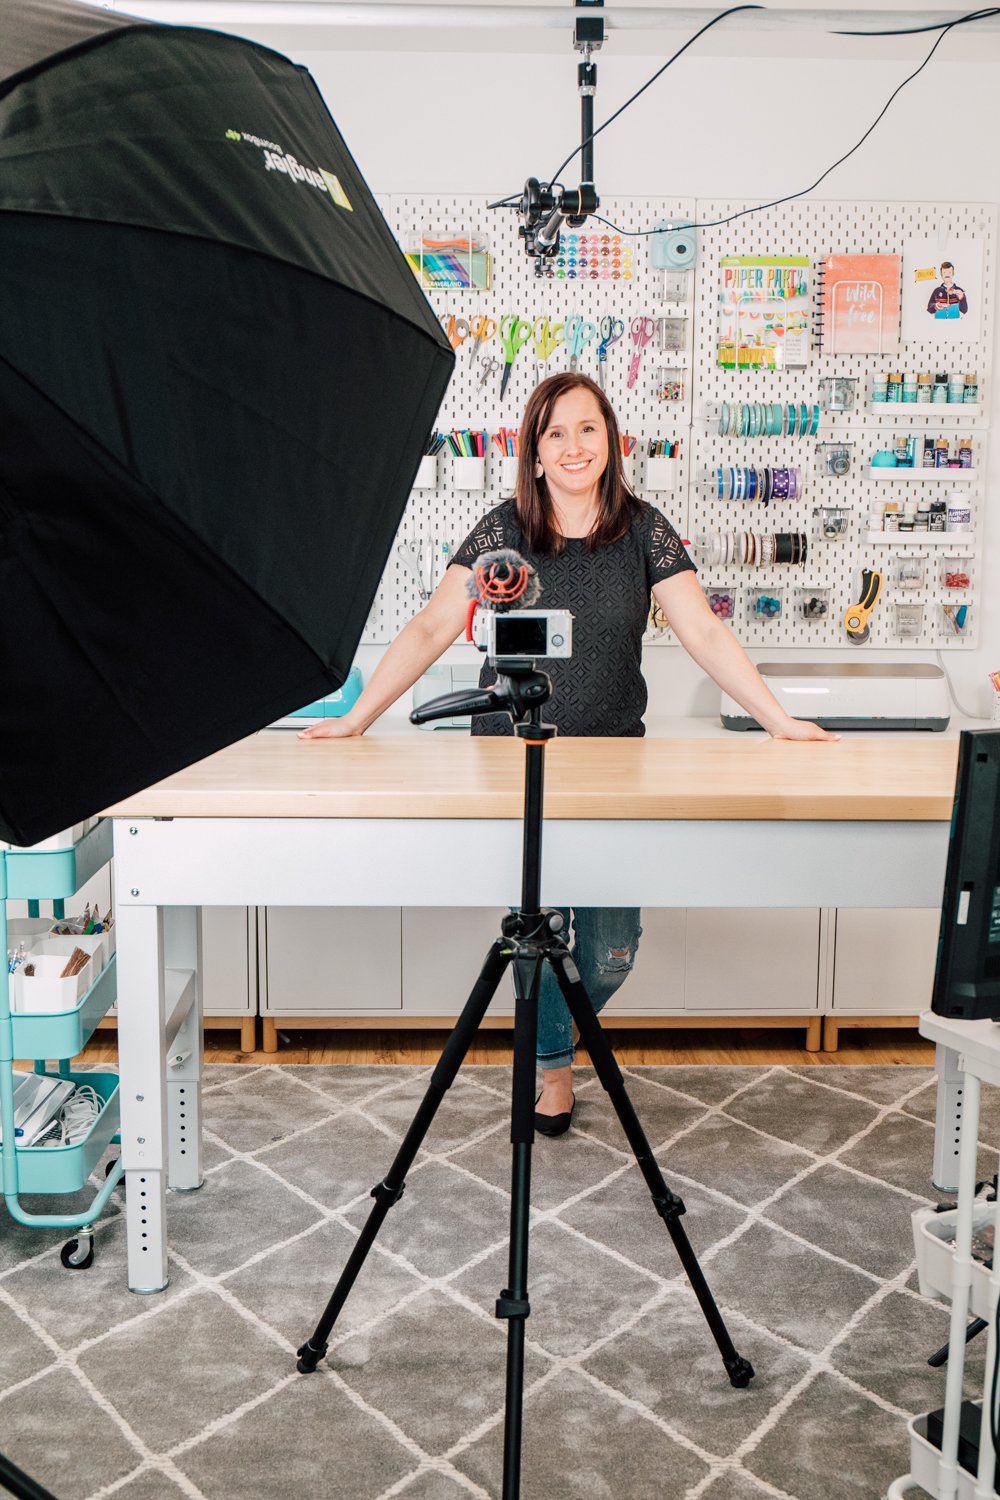 Cori at desk surrounded by camera equipment